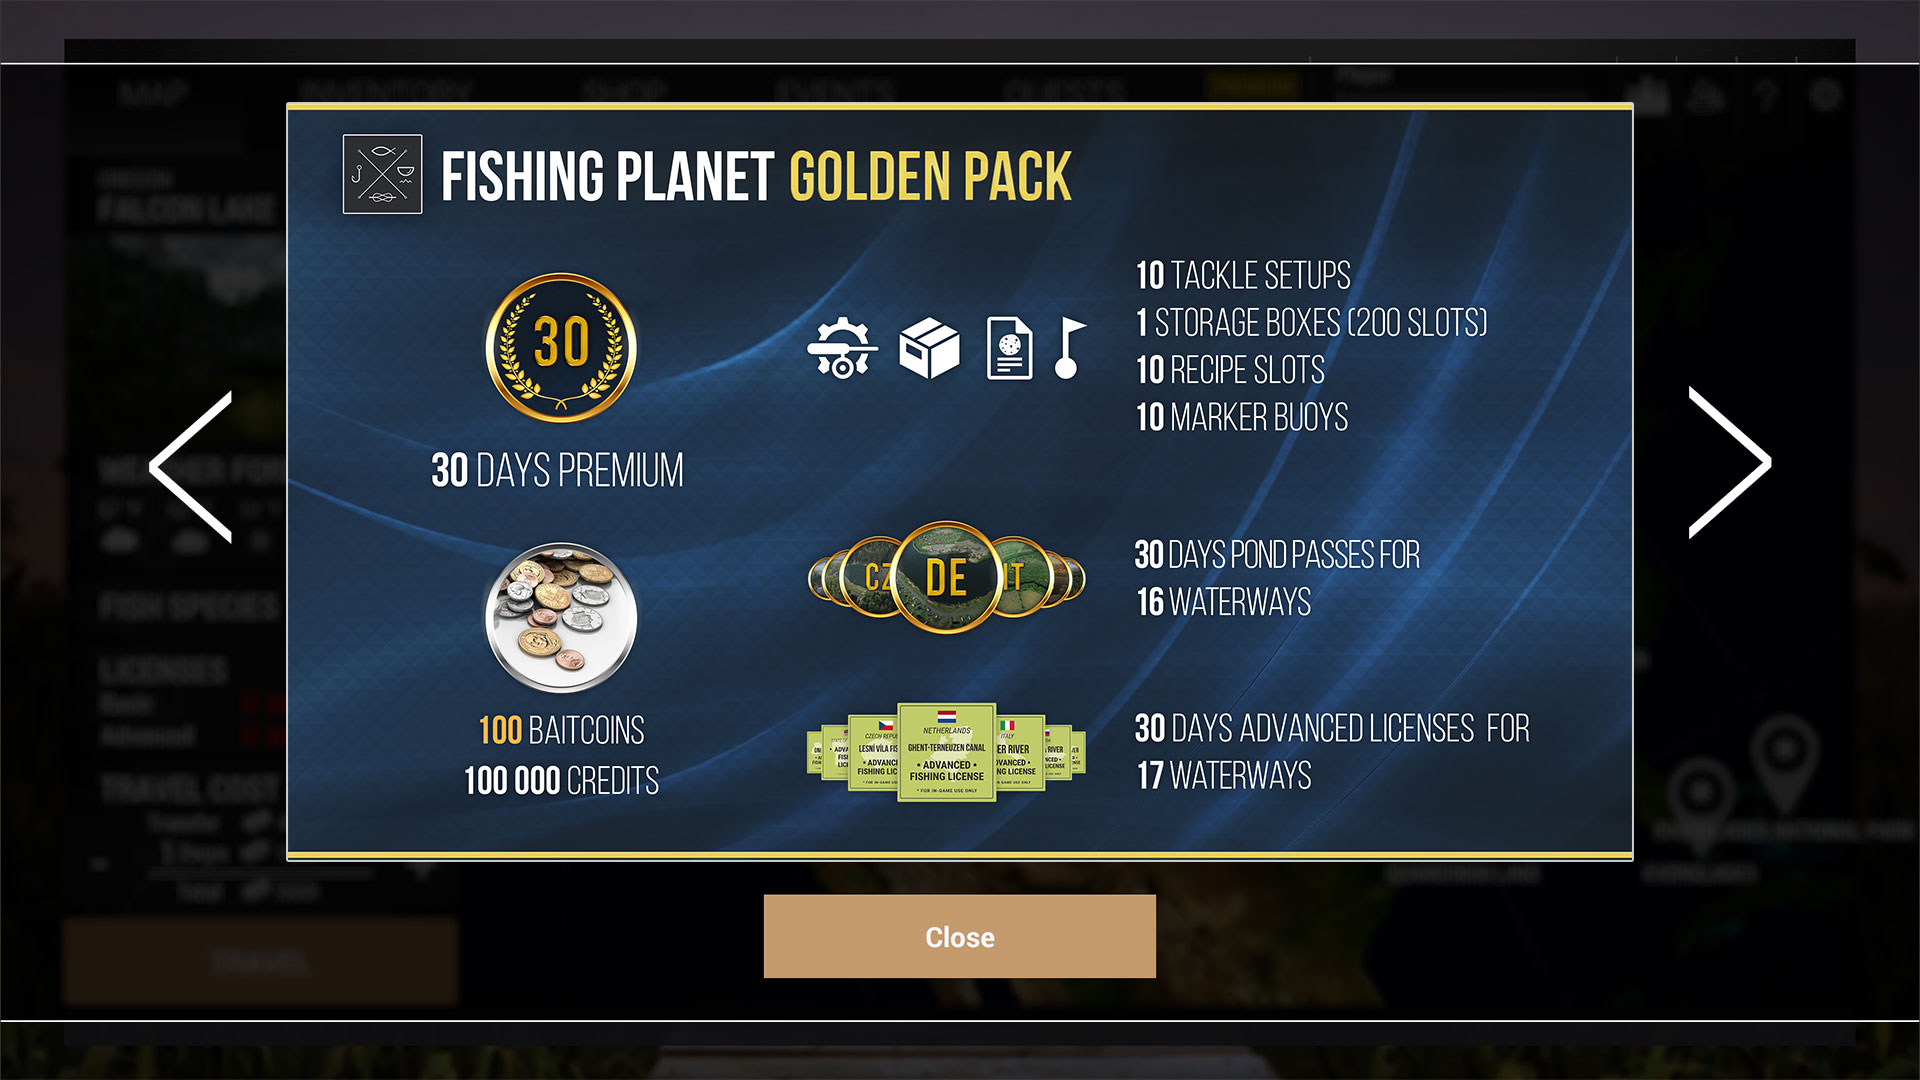 fishing planet golden dragon pack xbox one